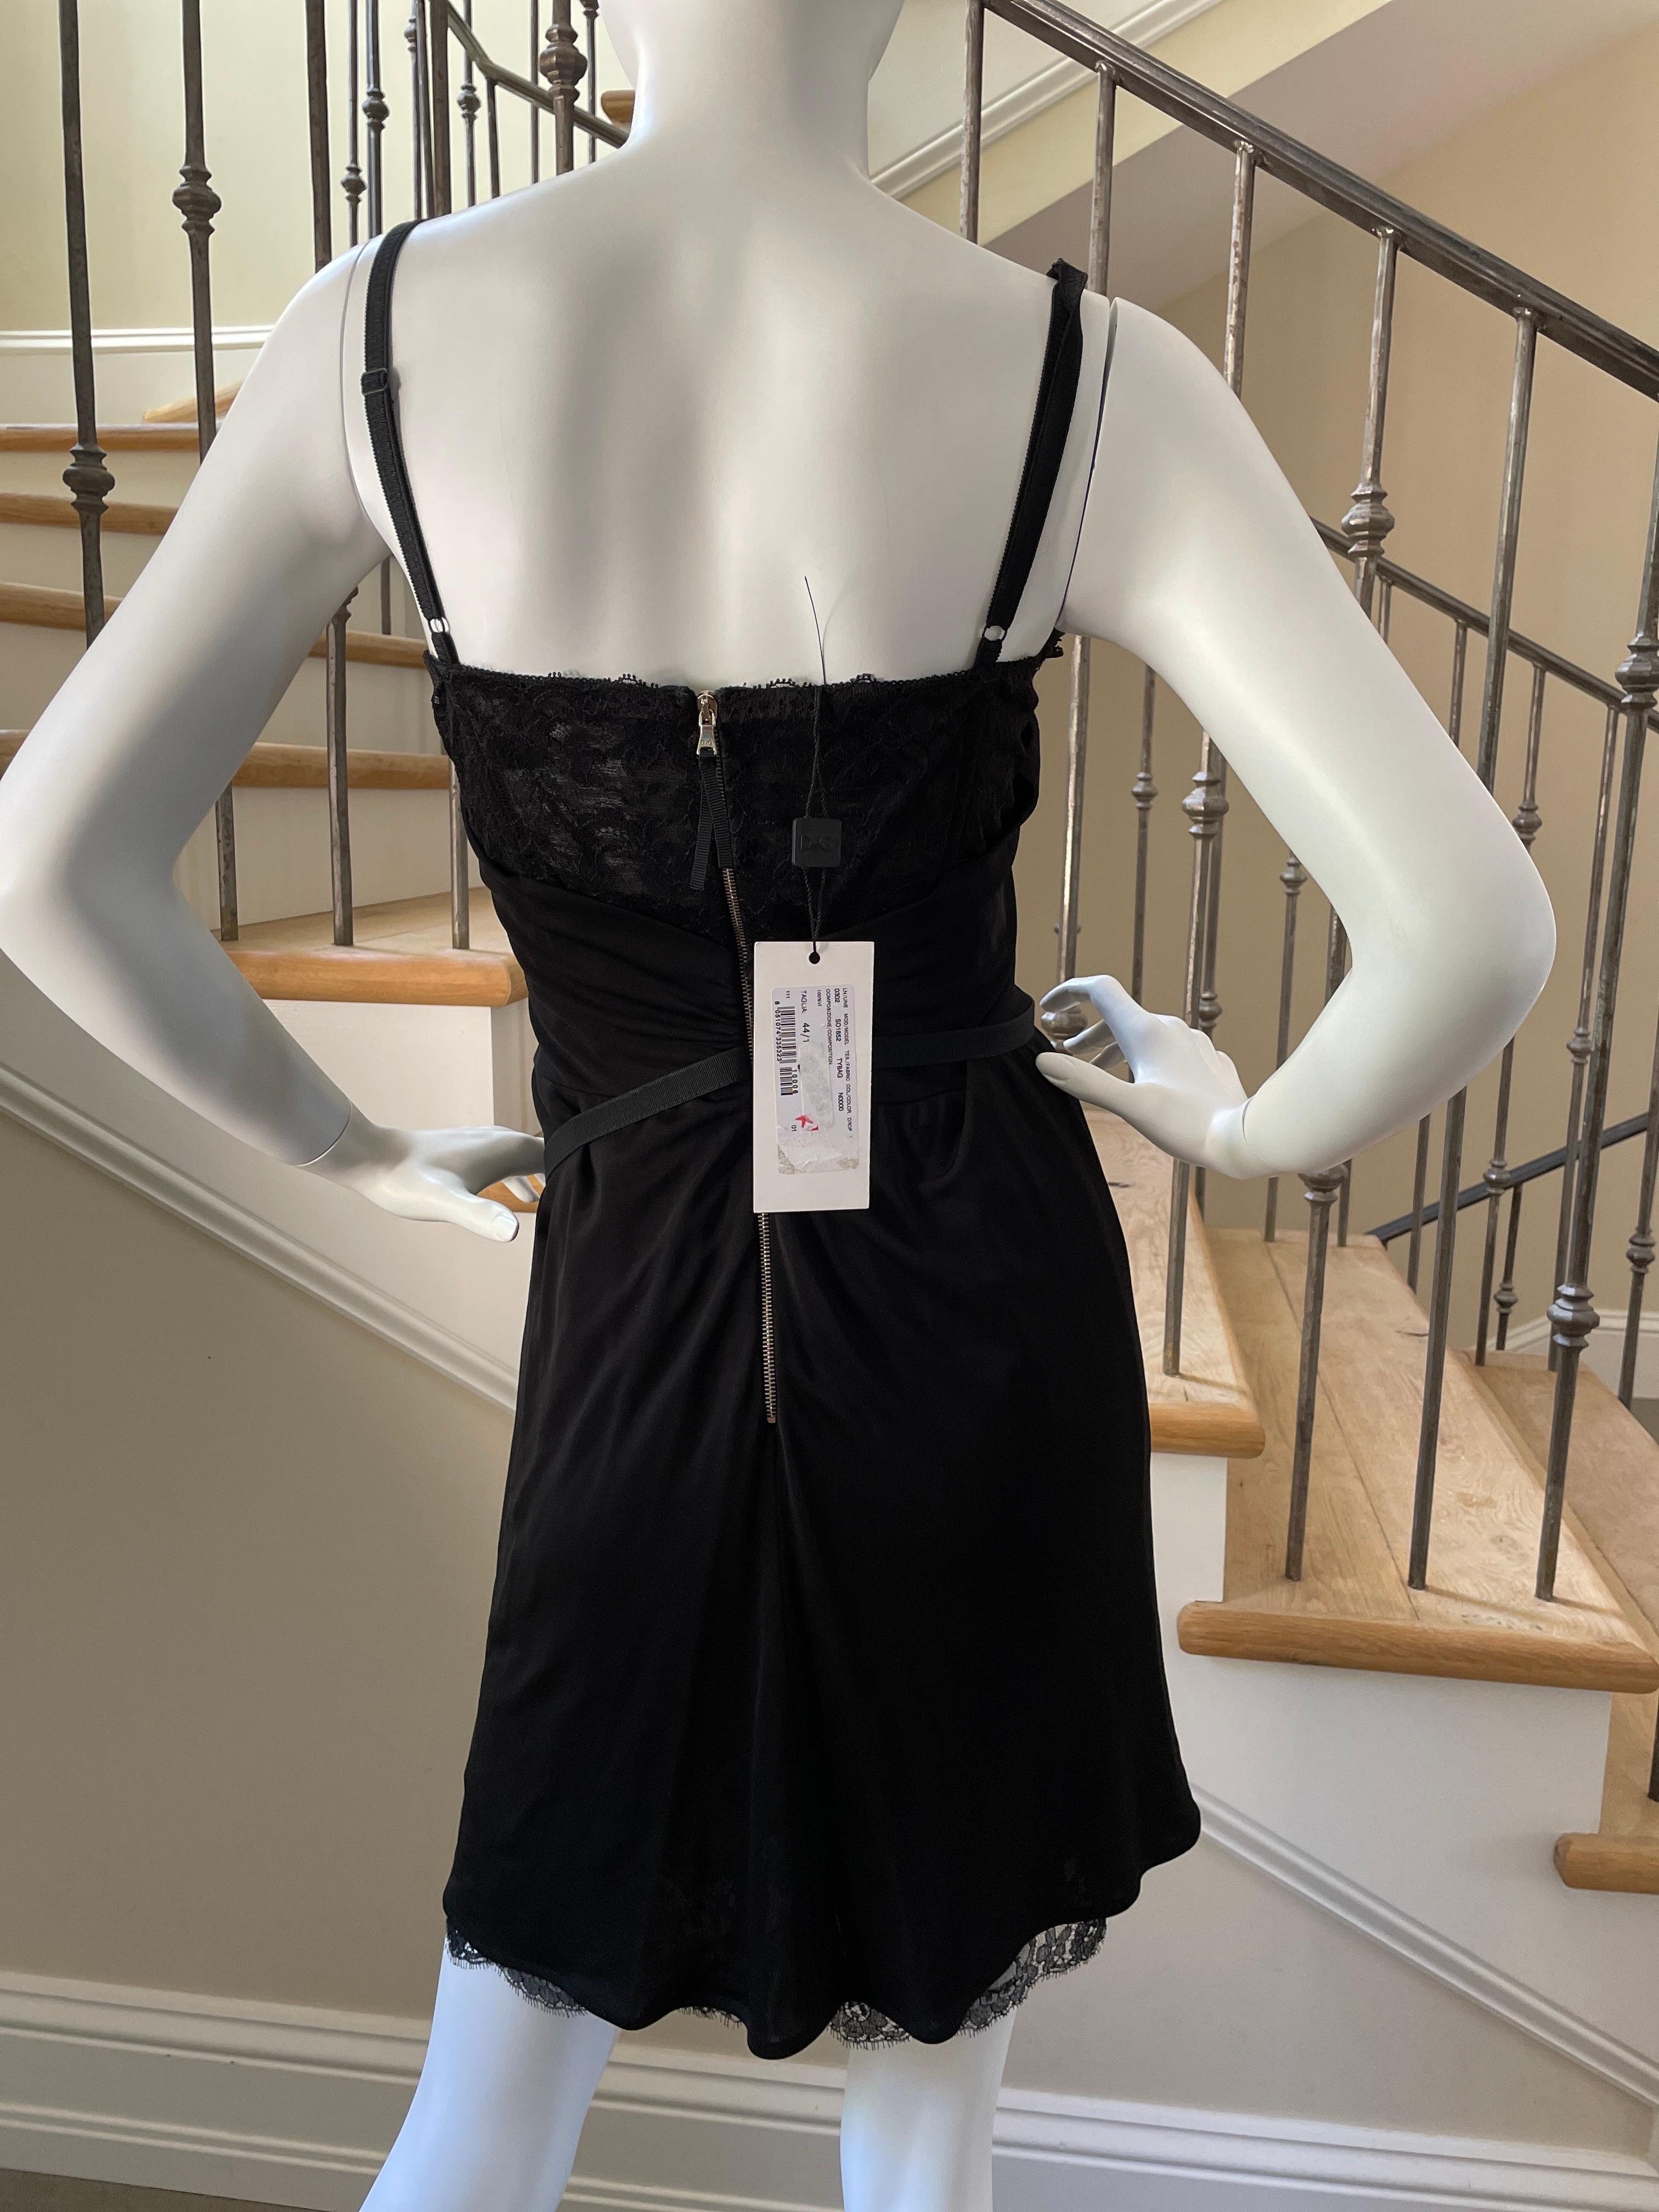 Women's D&G by Dolce & Gabbana Vintage Black Cocktail Dress with Inner Corset NWT For Sale